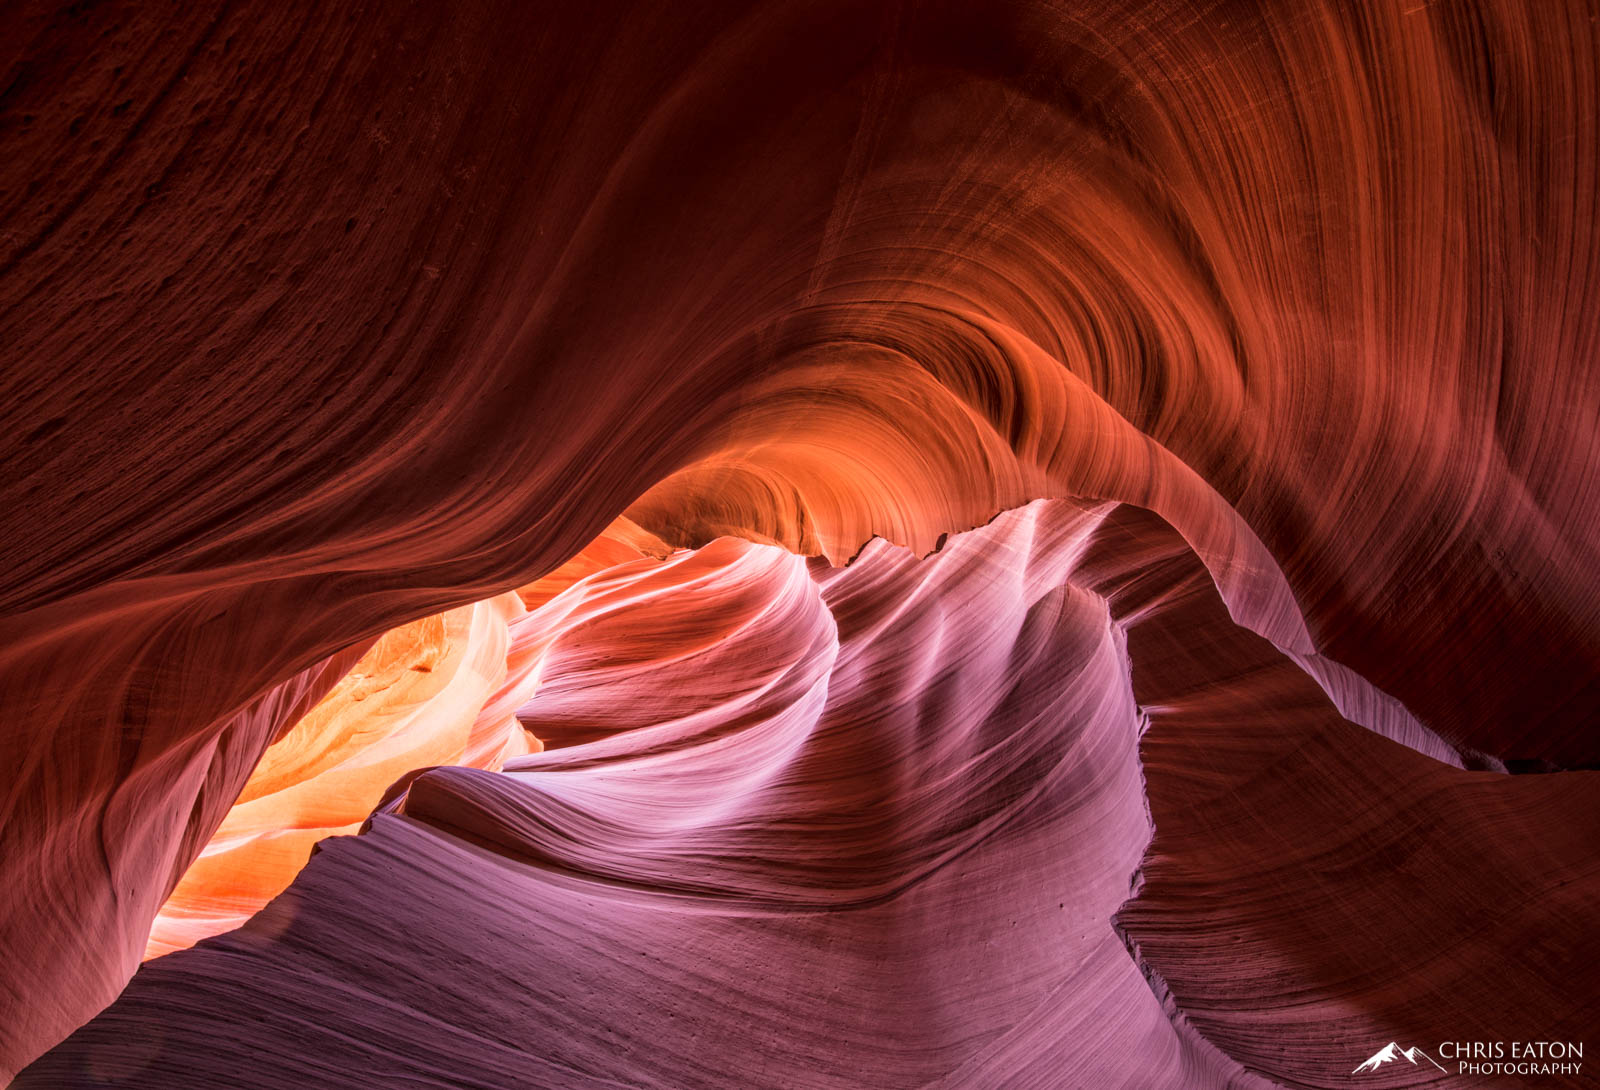 Even in a familiar landscape, new photograph present themselves regular. I've been through the lower section of Antelope Canyon...